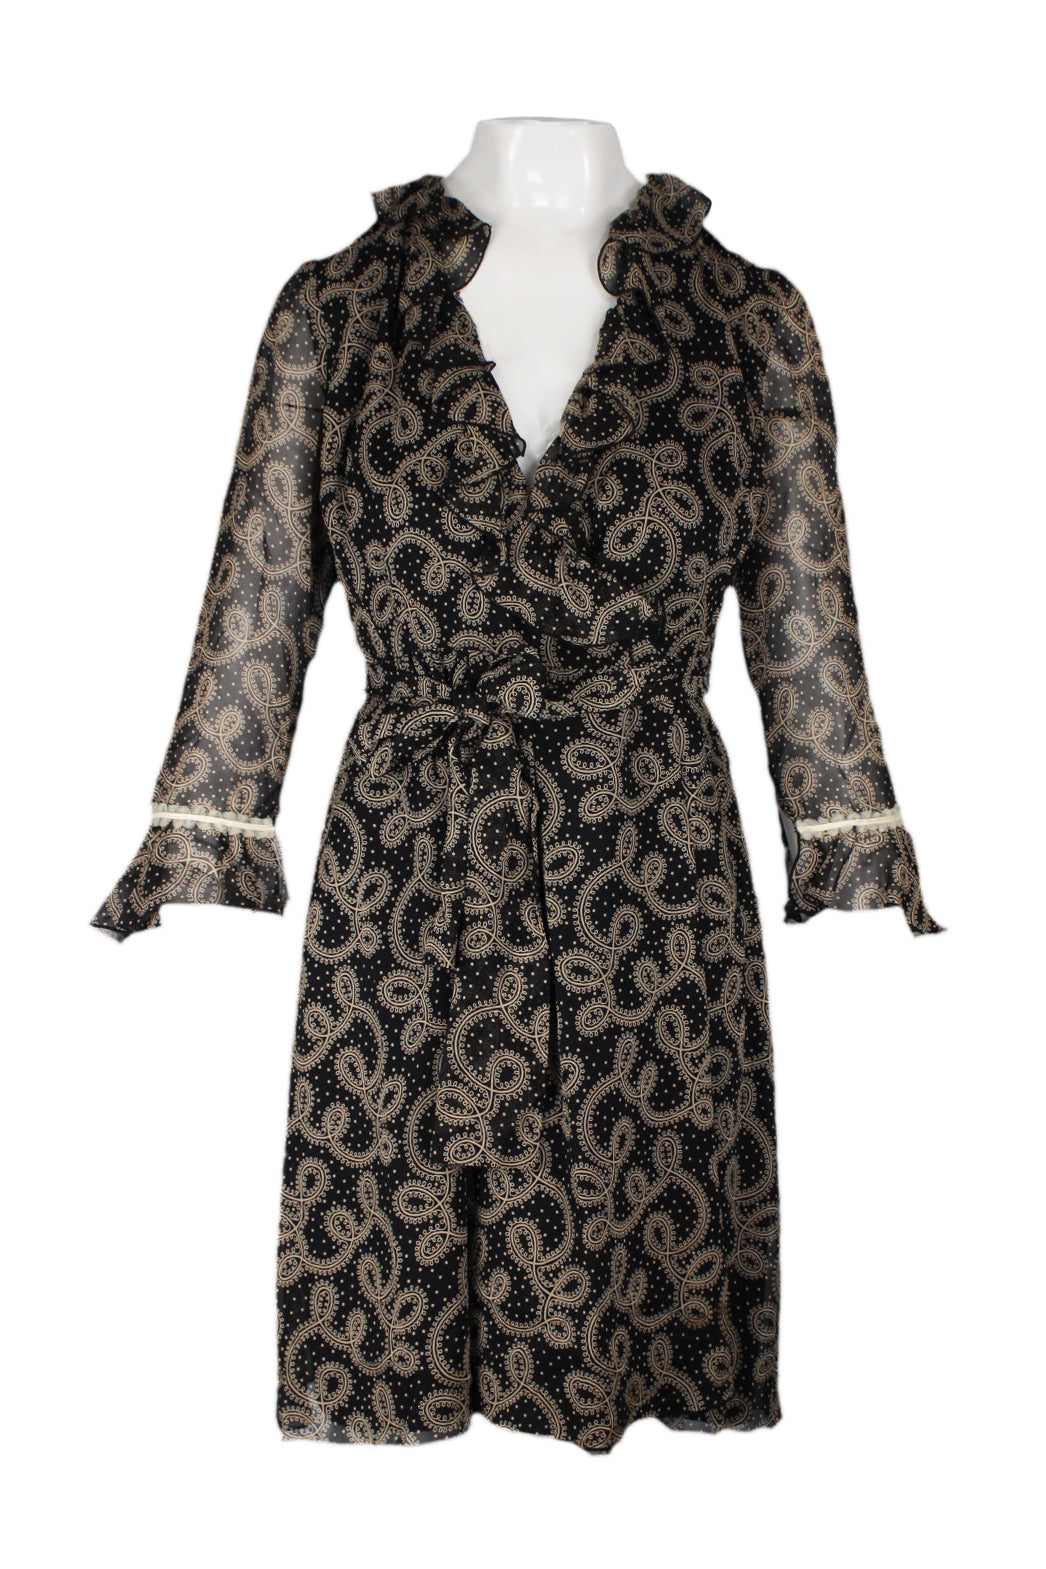 front of anna sui black/beige pailsey print ruffle wrap dress. v neckline with ruffled collar. sheer 3/4 length sleeves with ruffle sleeve cuff and lace trim. cross-over snap button and hook-and-eye closure at waist with tie belt. this garment is a production sample, and is missing the interior size and care tags.